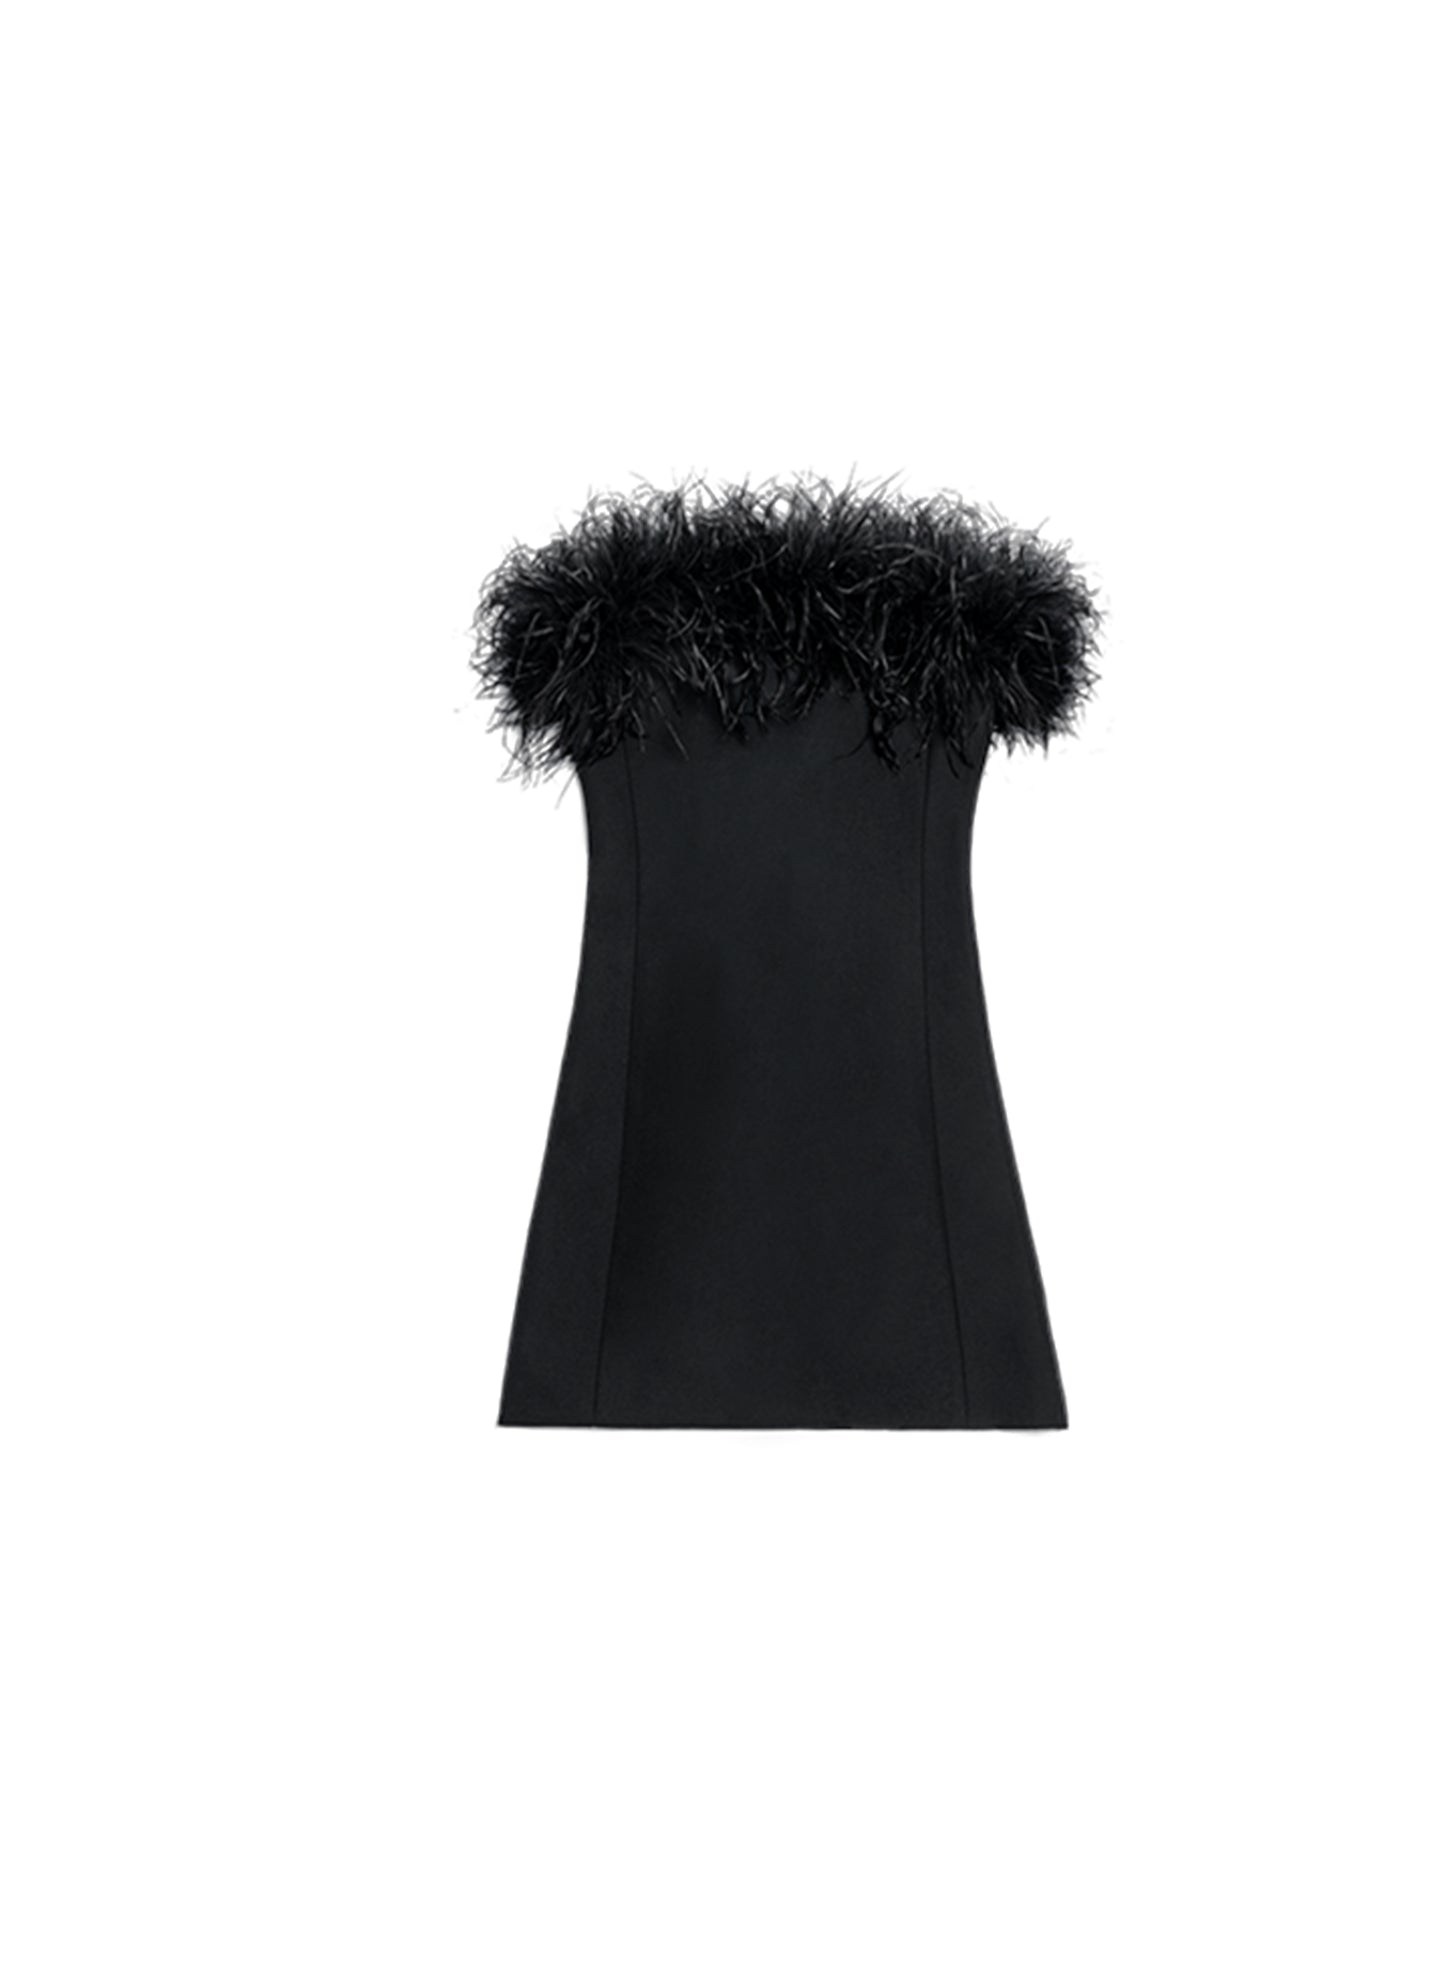 Wool Blend Feathers Strapless Dress in Black